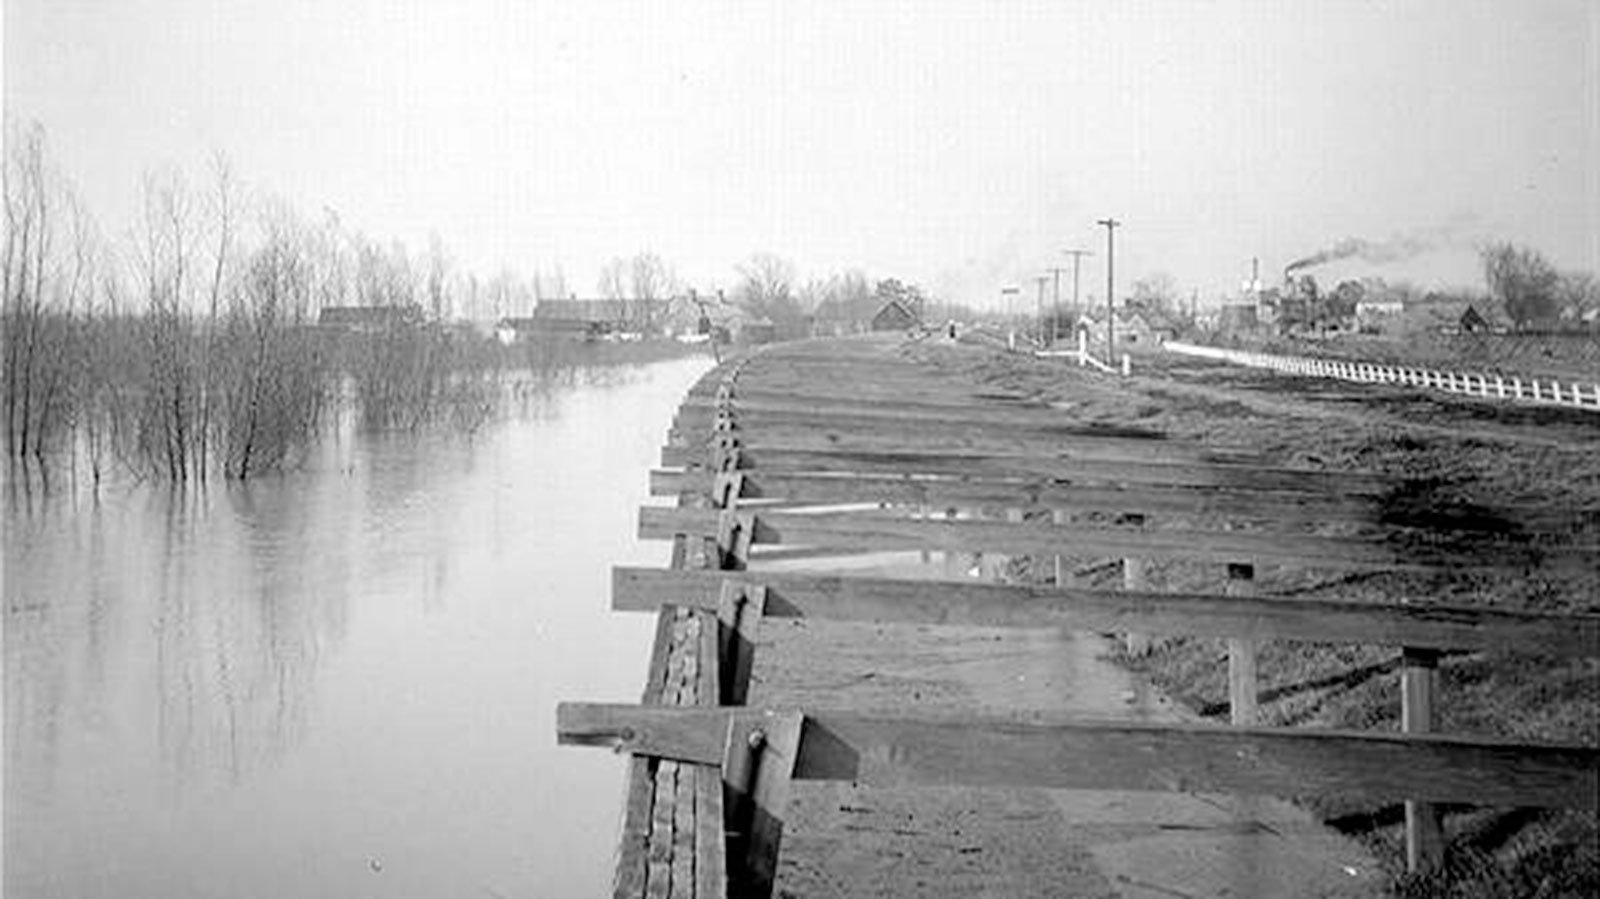 A high river and board revetment at Carrollton Bend in New Orleans, Louisiana, circa 1900